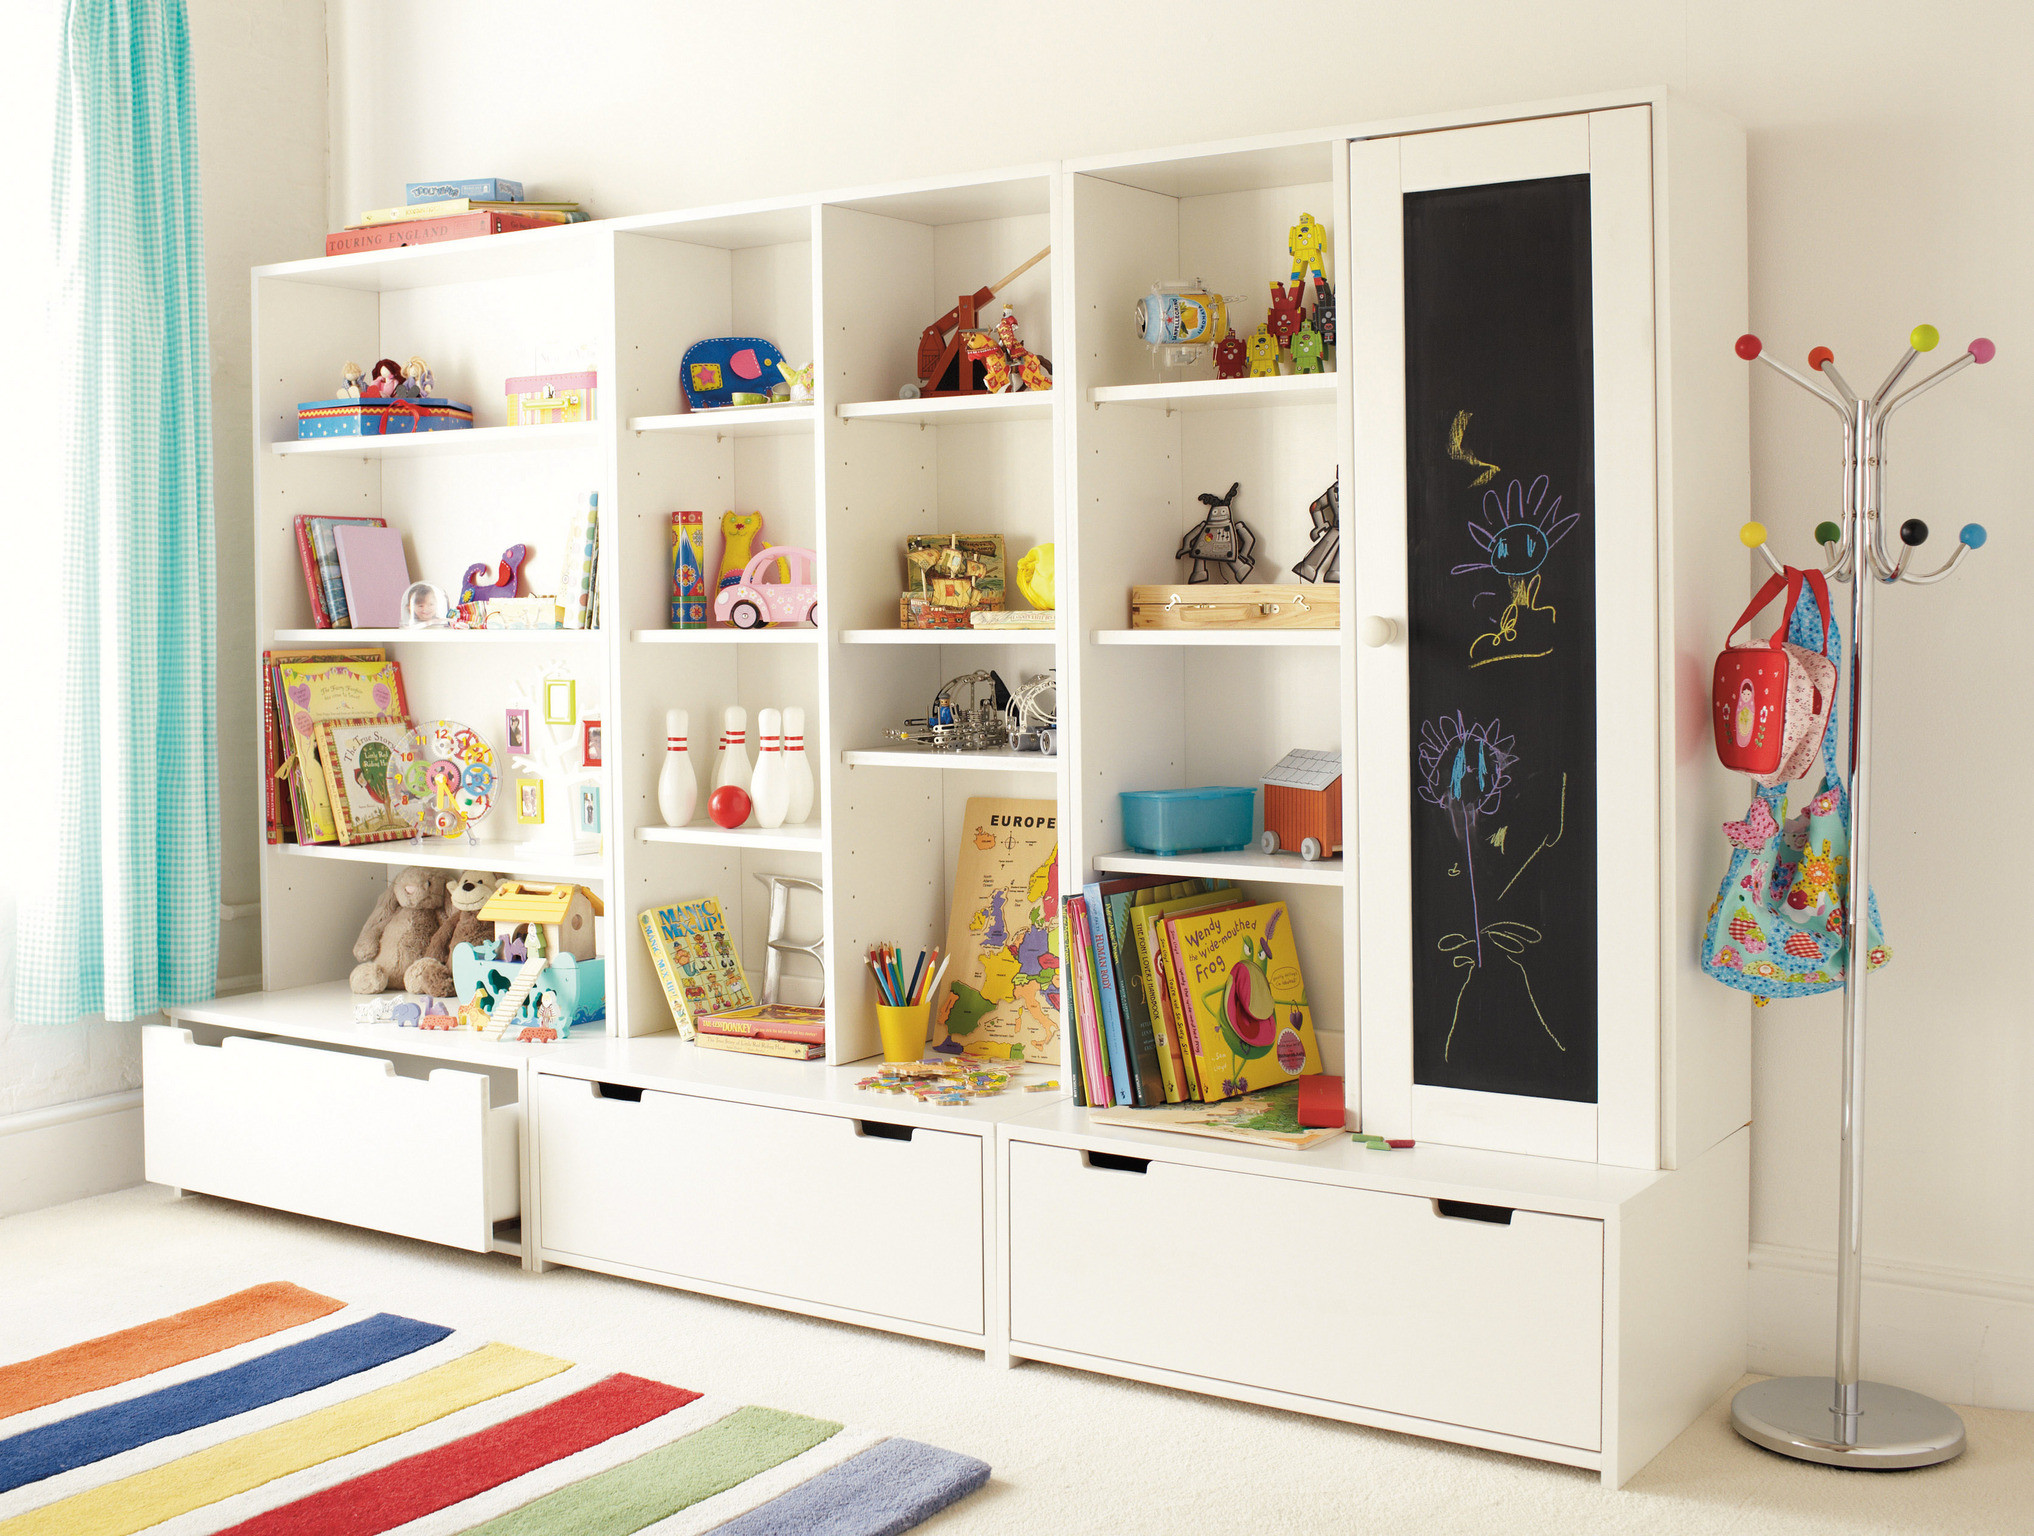 Wall Shelves For Kids Rooms
 Most Precise Children’s Playroom Storage Ideas 42 Room